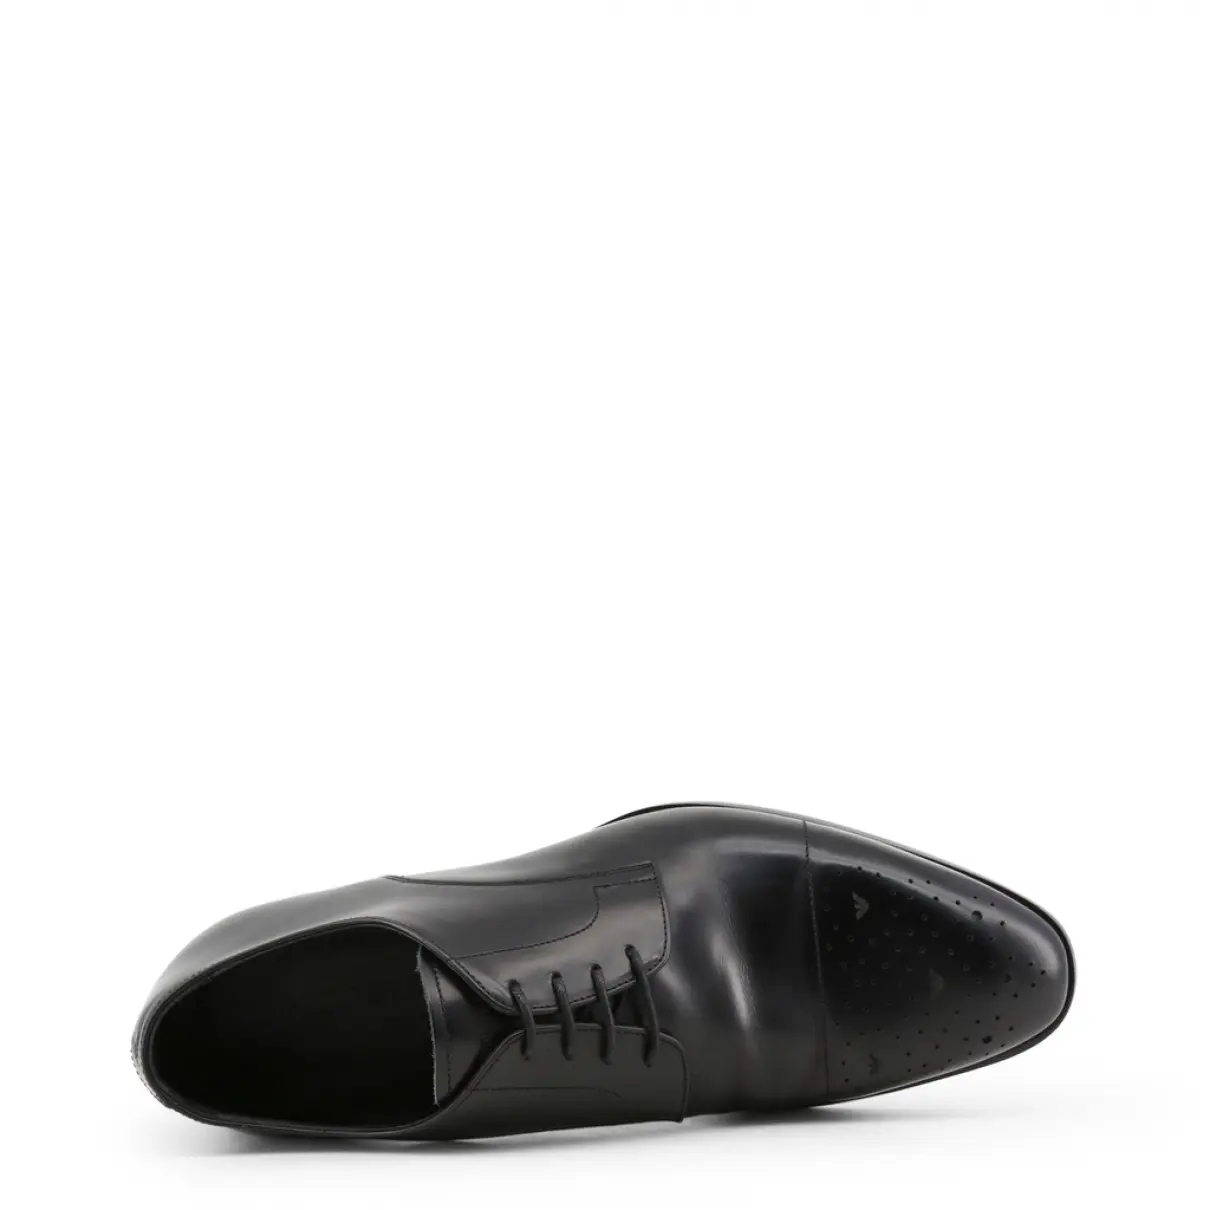 Buy Emporio Armani Leather lace ups online